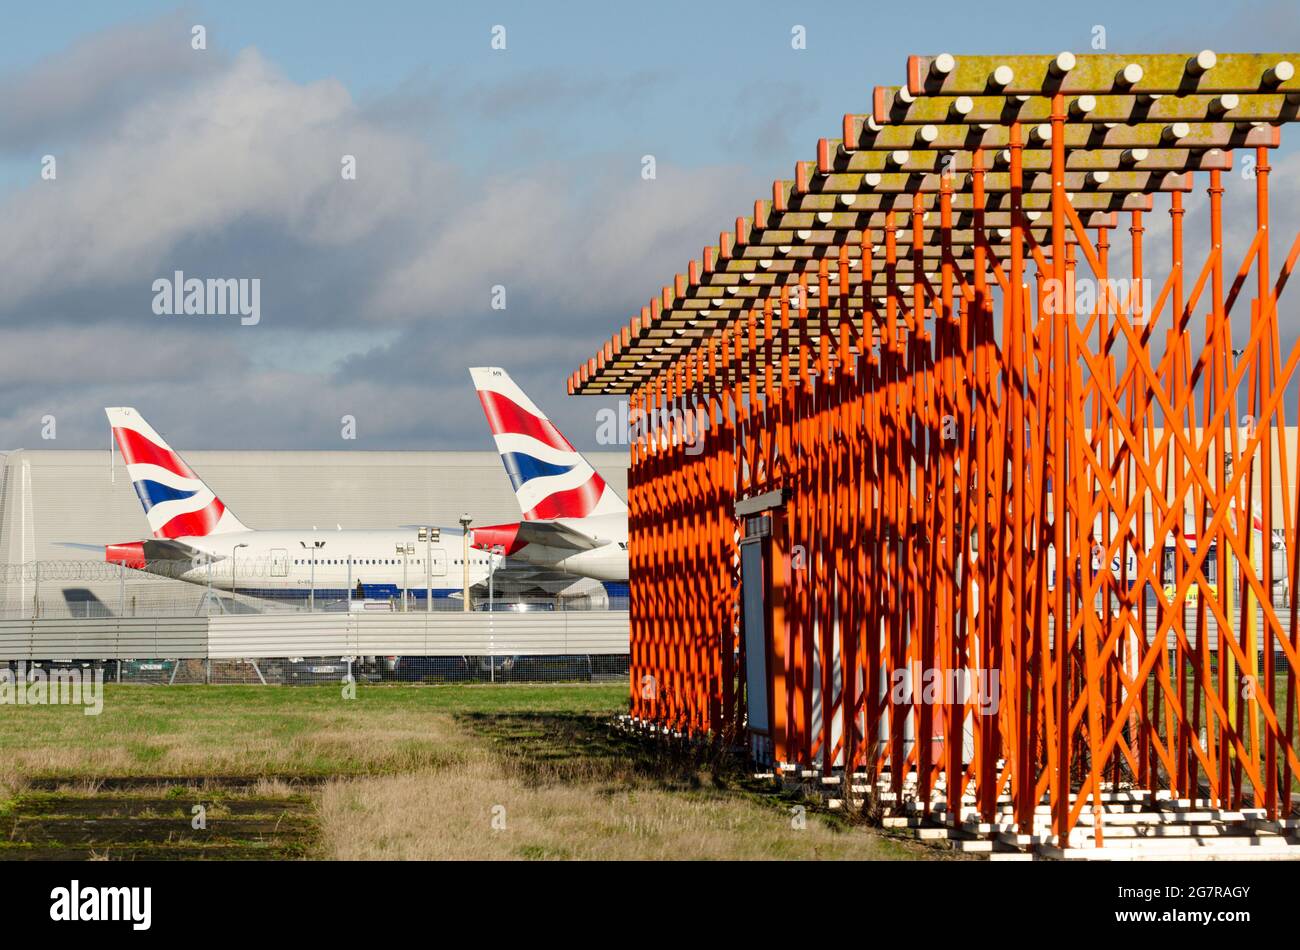 Instrument Landing System (ILS) area at London Heathrow Airport, UK. Pilot navigation approach aid guiding aircraft in to land safely Stock Photo